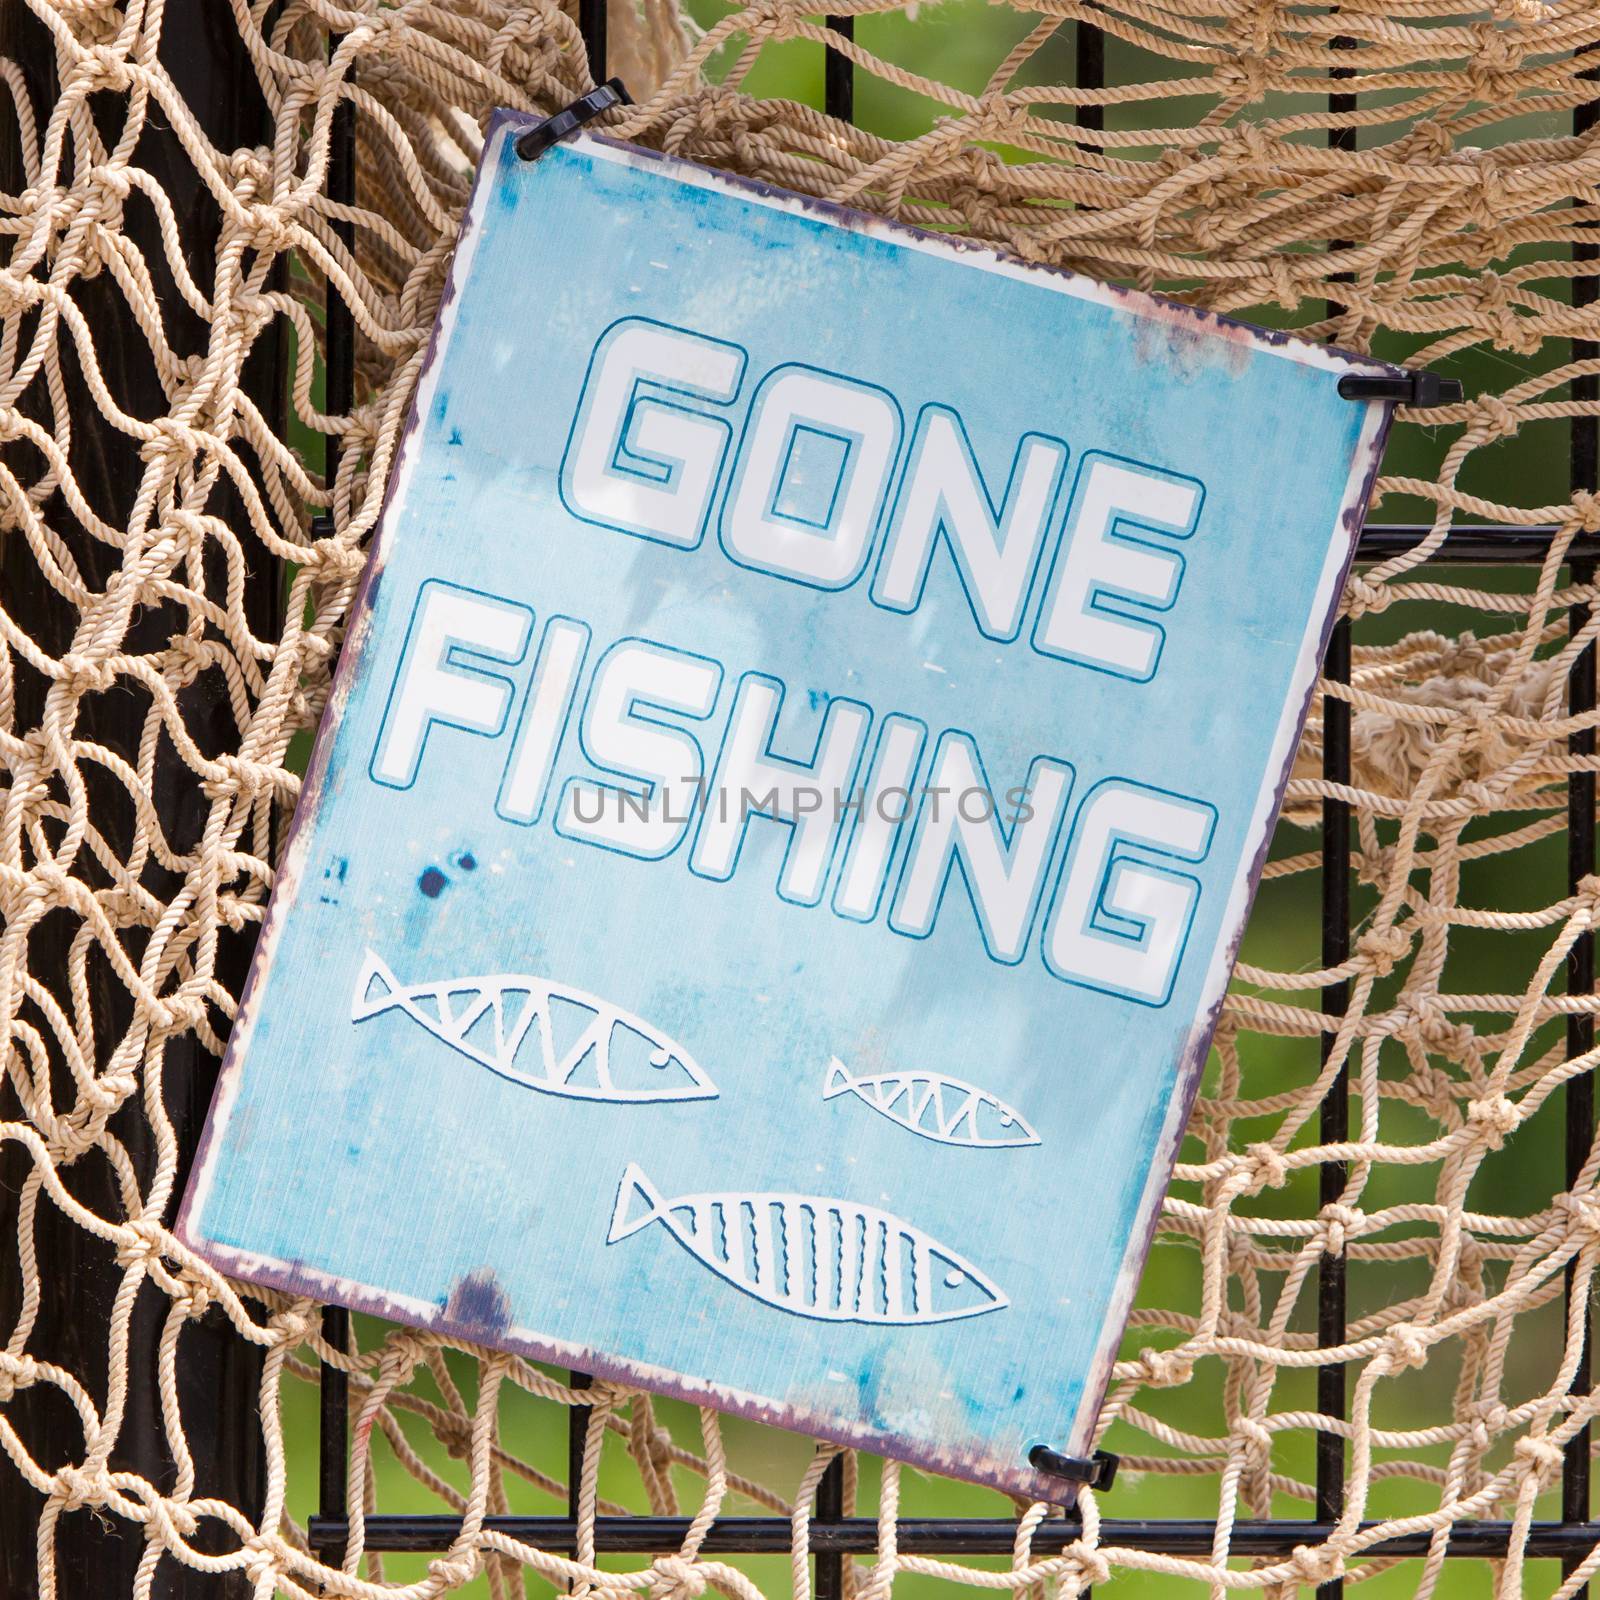 Gone fishing sign by michaklootwijk